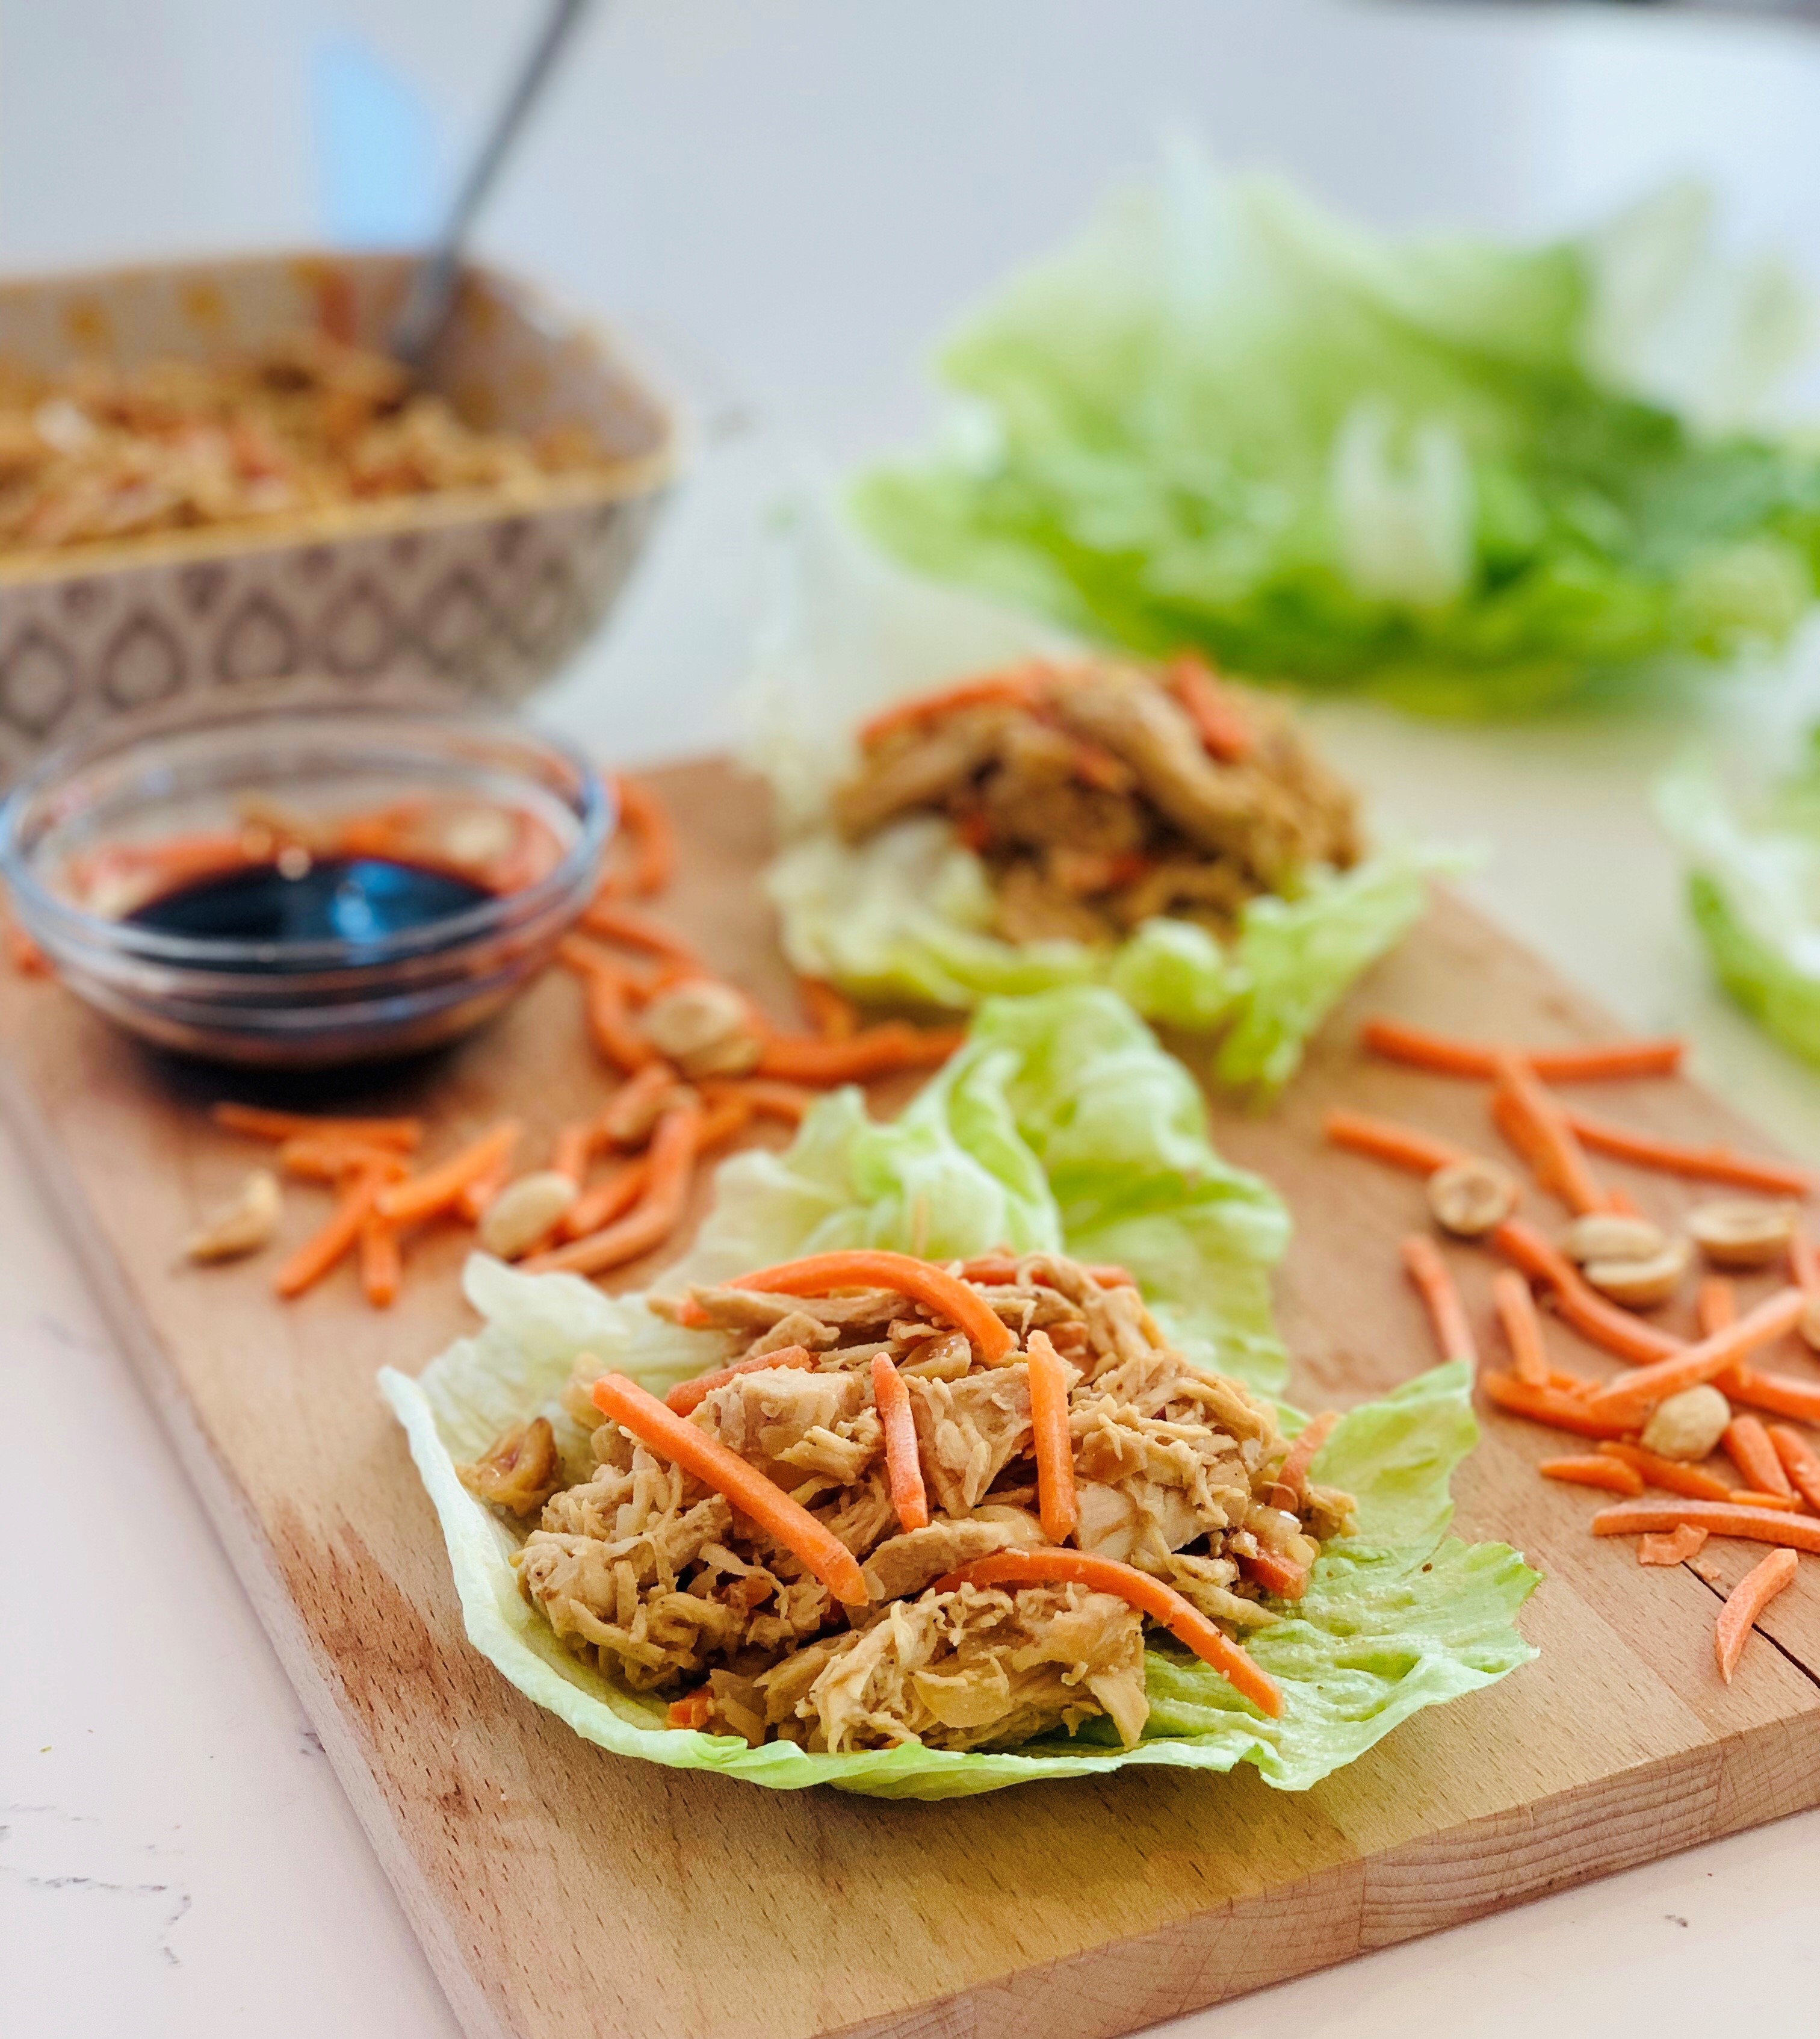 Lettuce Wraps – Welcome to Whitneyland